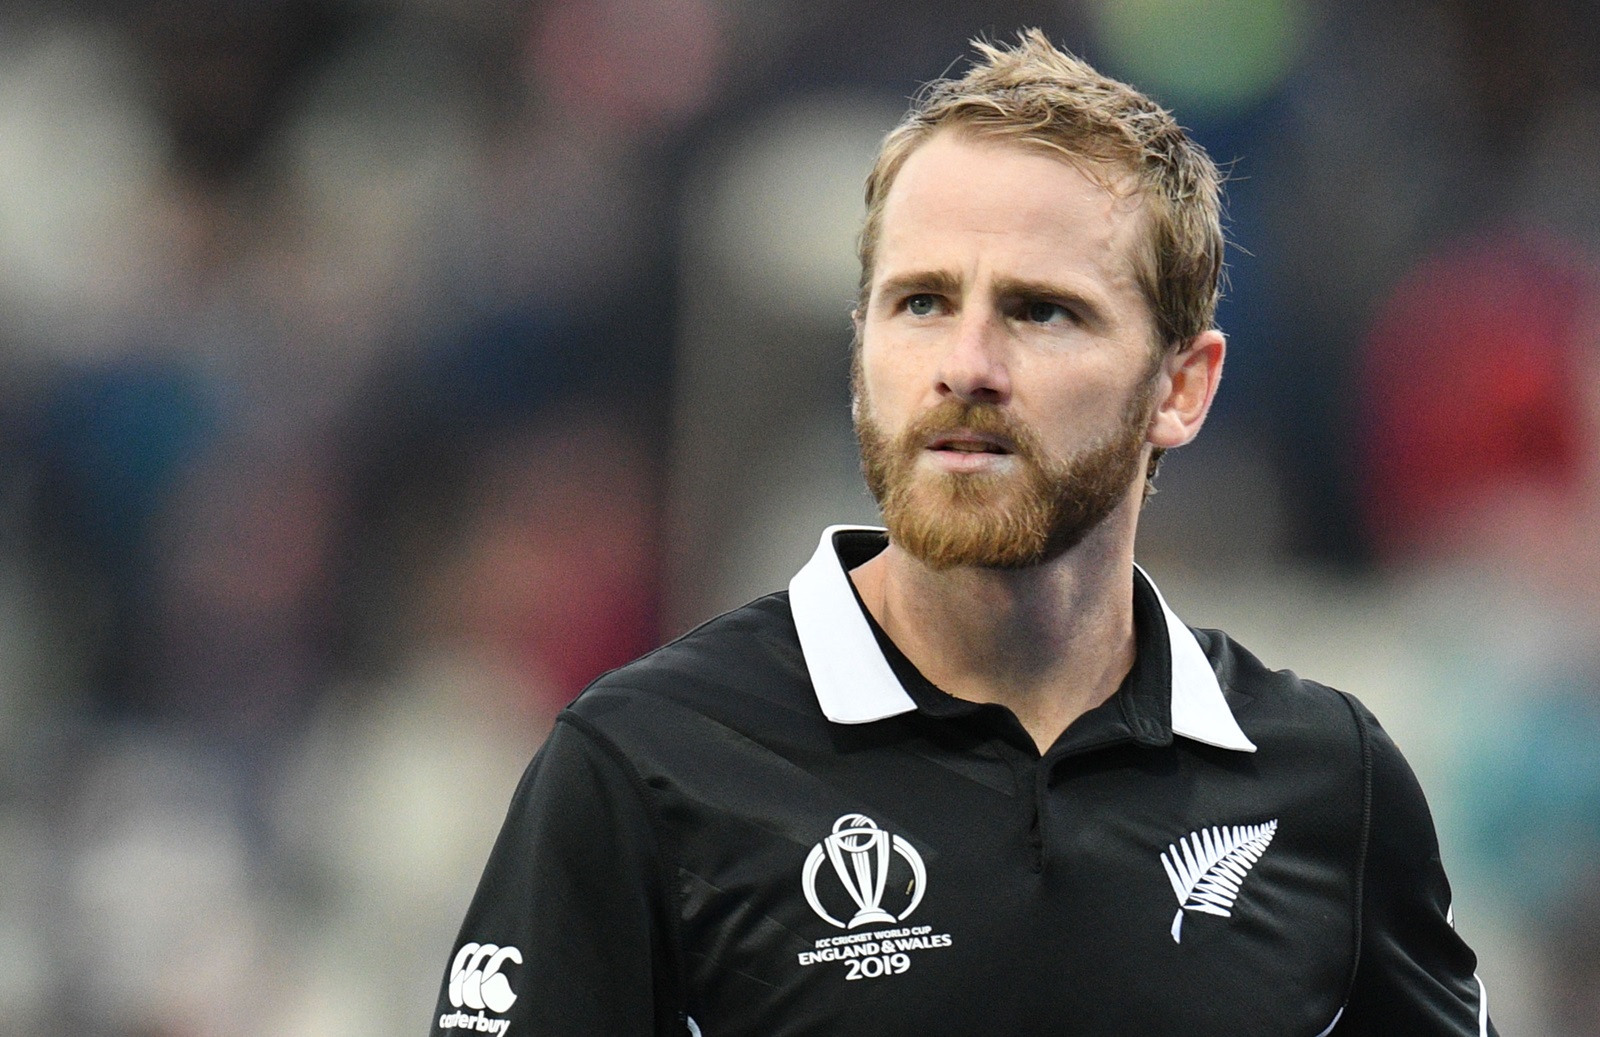 Kane Williamson Made Most Runs in a Series as a Captain